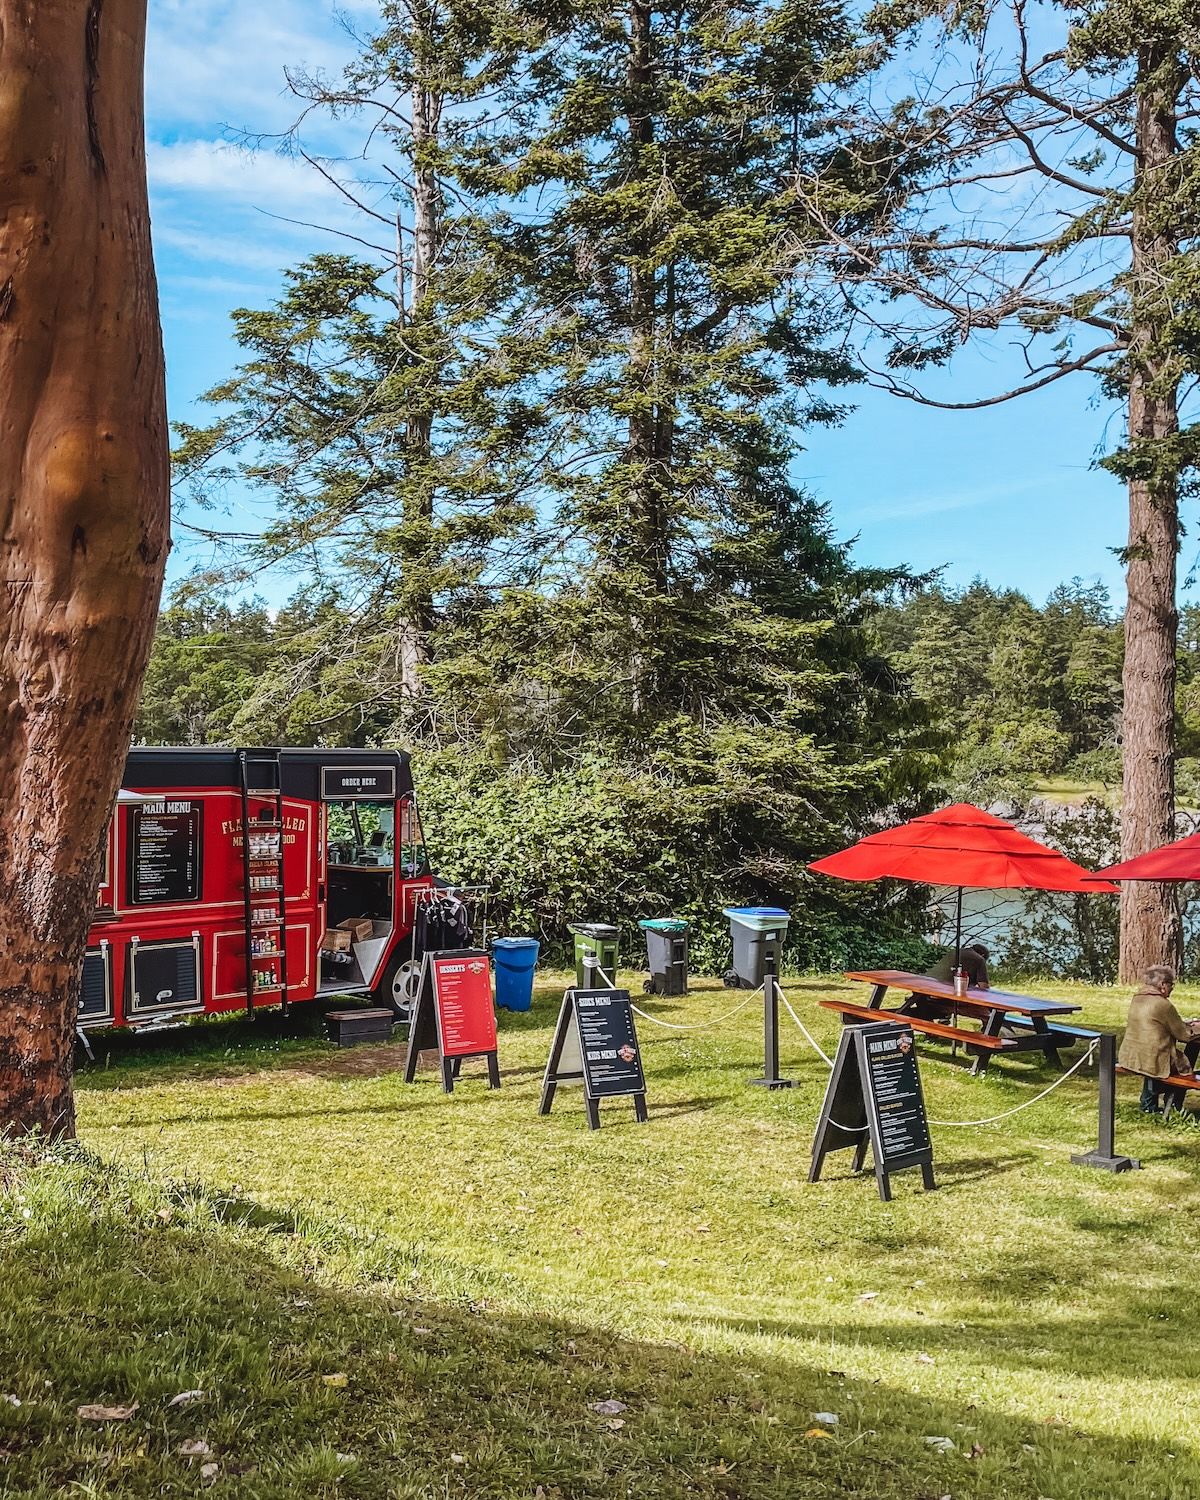 The red Fireside food truck parked in a grassy lawn with picnic tables and red umbrellas